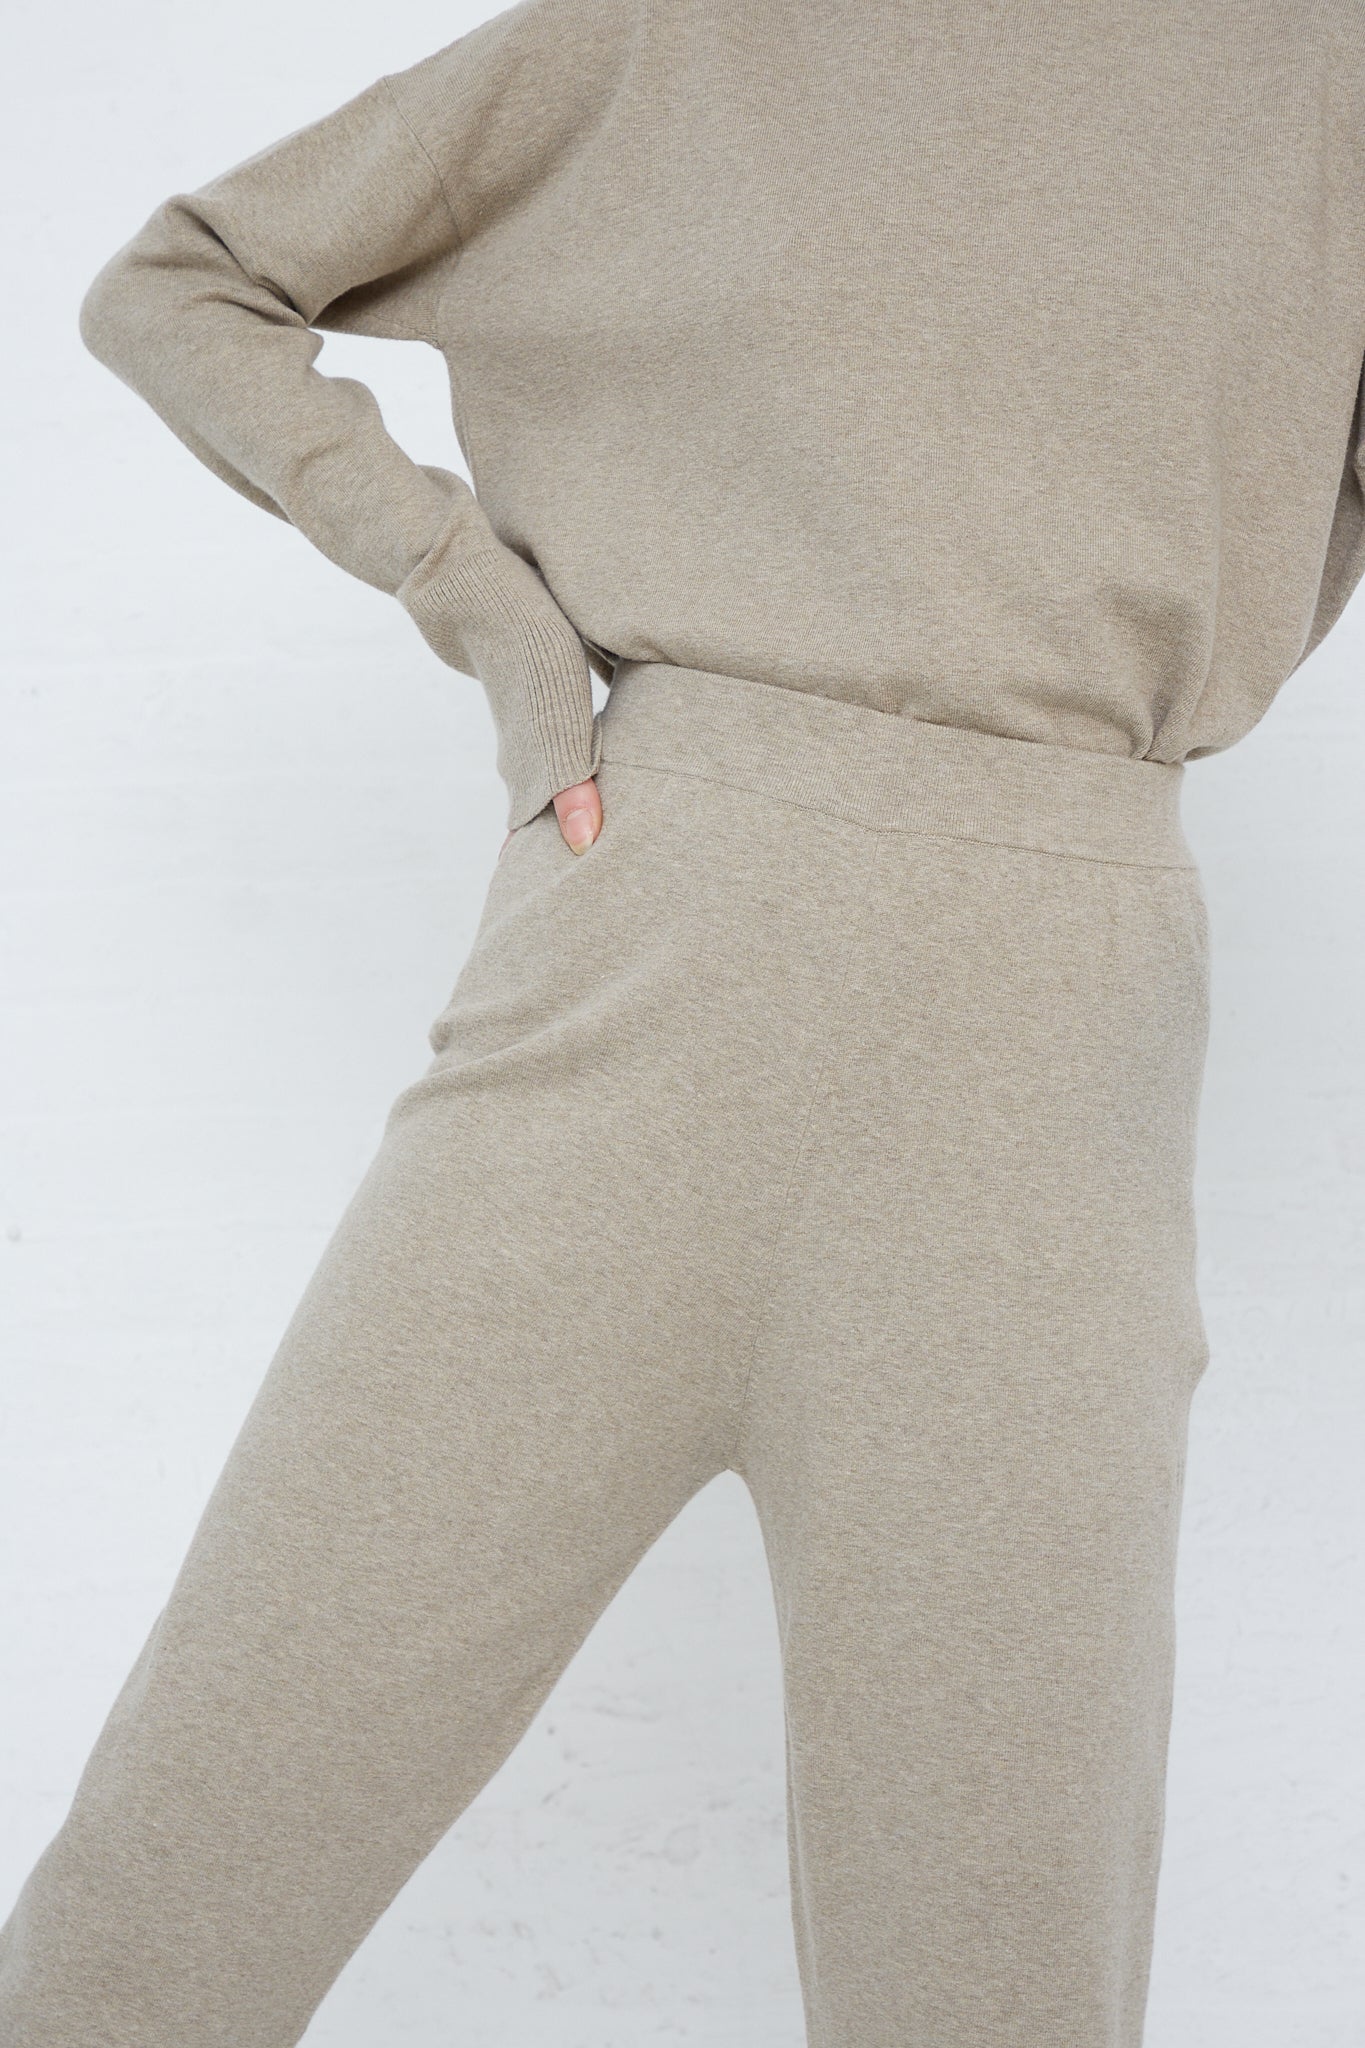 The model is wearing a beige sweater and the Lauren Manoogian Base Pant in Stone Melange with an elasticated waist. Front view and up close.